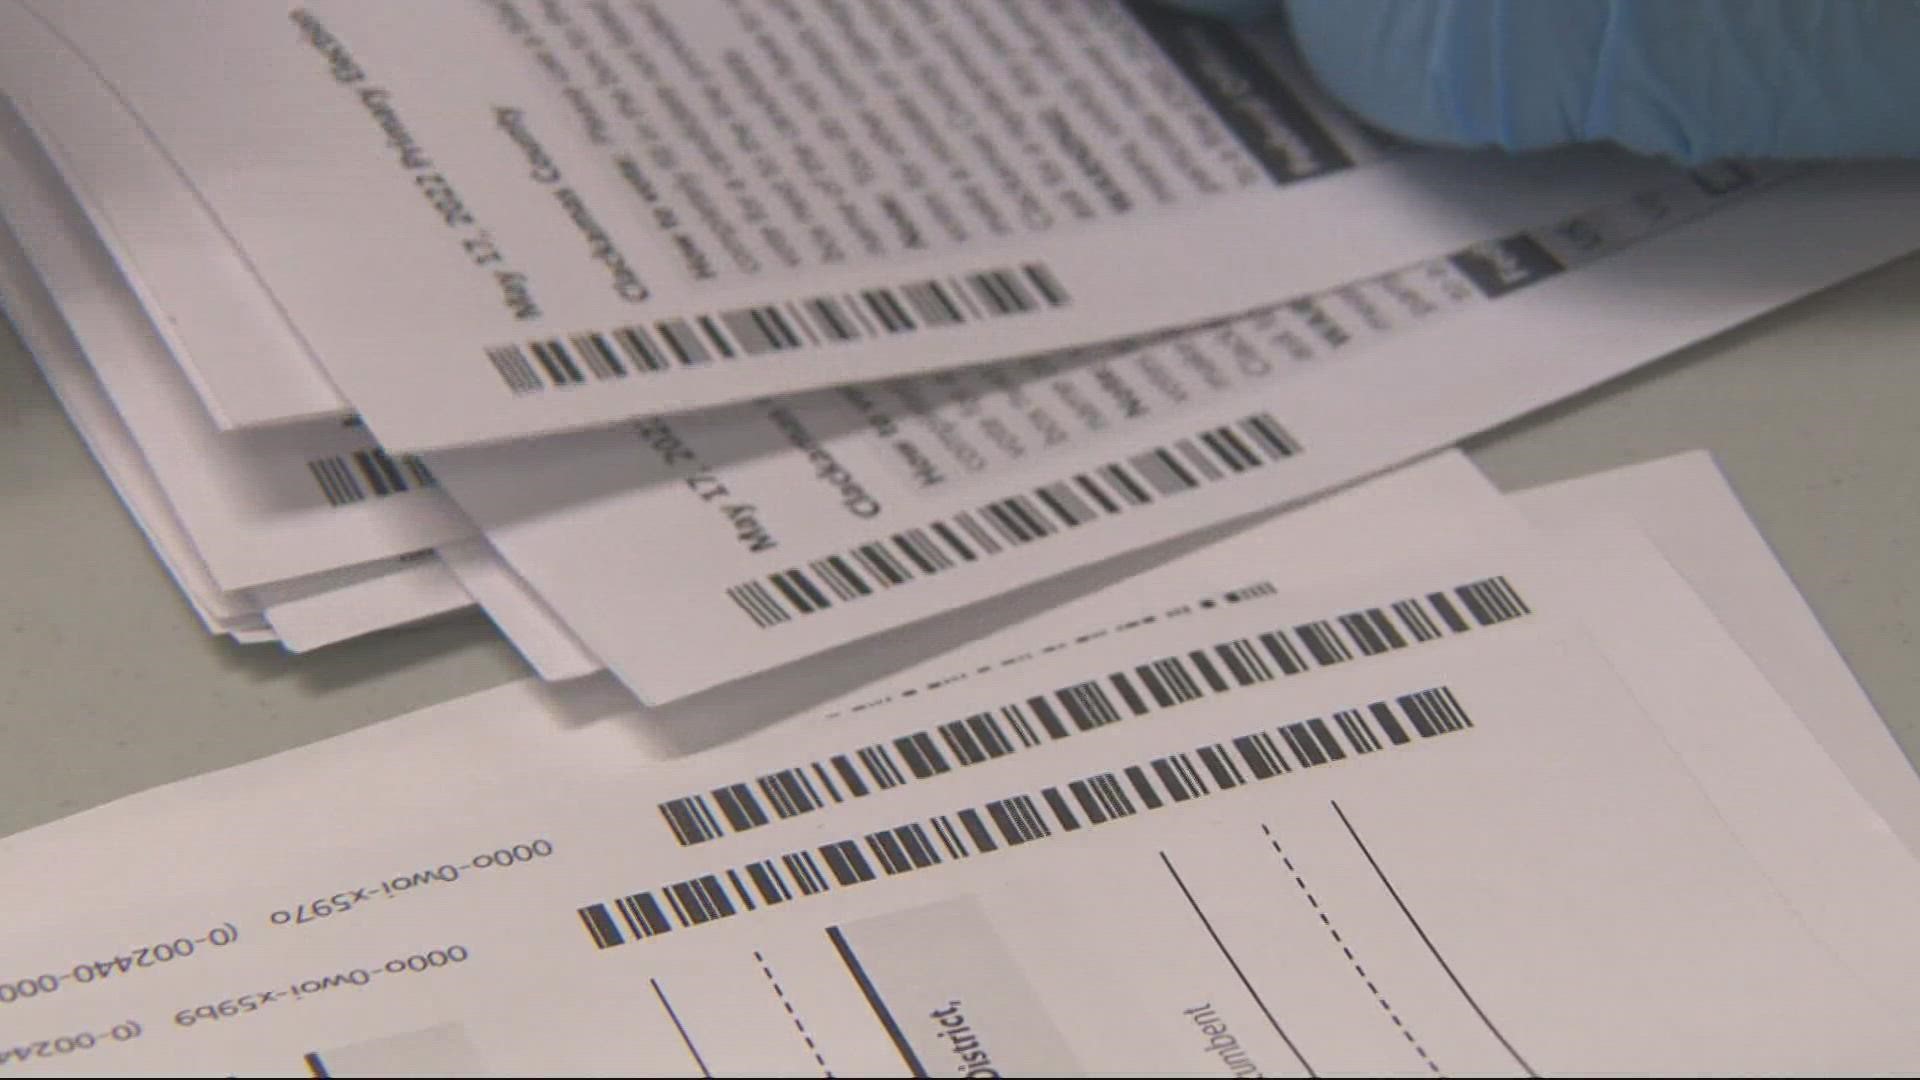 Clerk Sherry Hall spoke to KGW on Friday, discussing why she did not react to the known issue with thousands of ballots sooner.